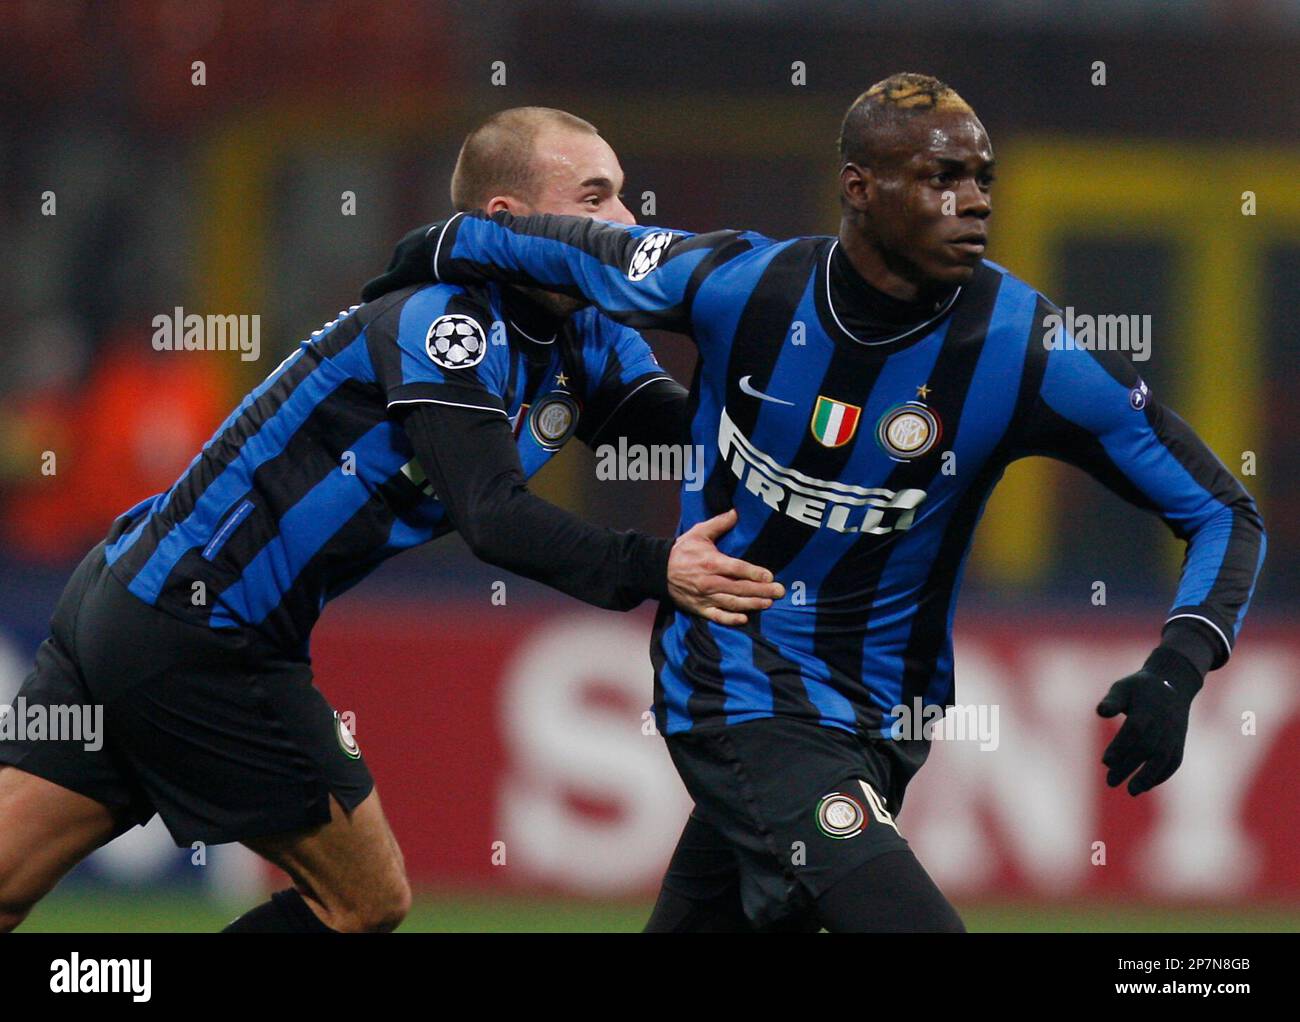 Inter Milan's Mario Balotelli, right, celebrates after scoring with  teammate Wesley Sneijder of the Netherlands, during a Group F, Champions  League match between Inter Milan and Rubin Kazan, at the San Siro